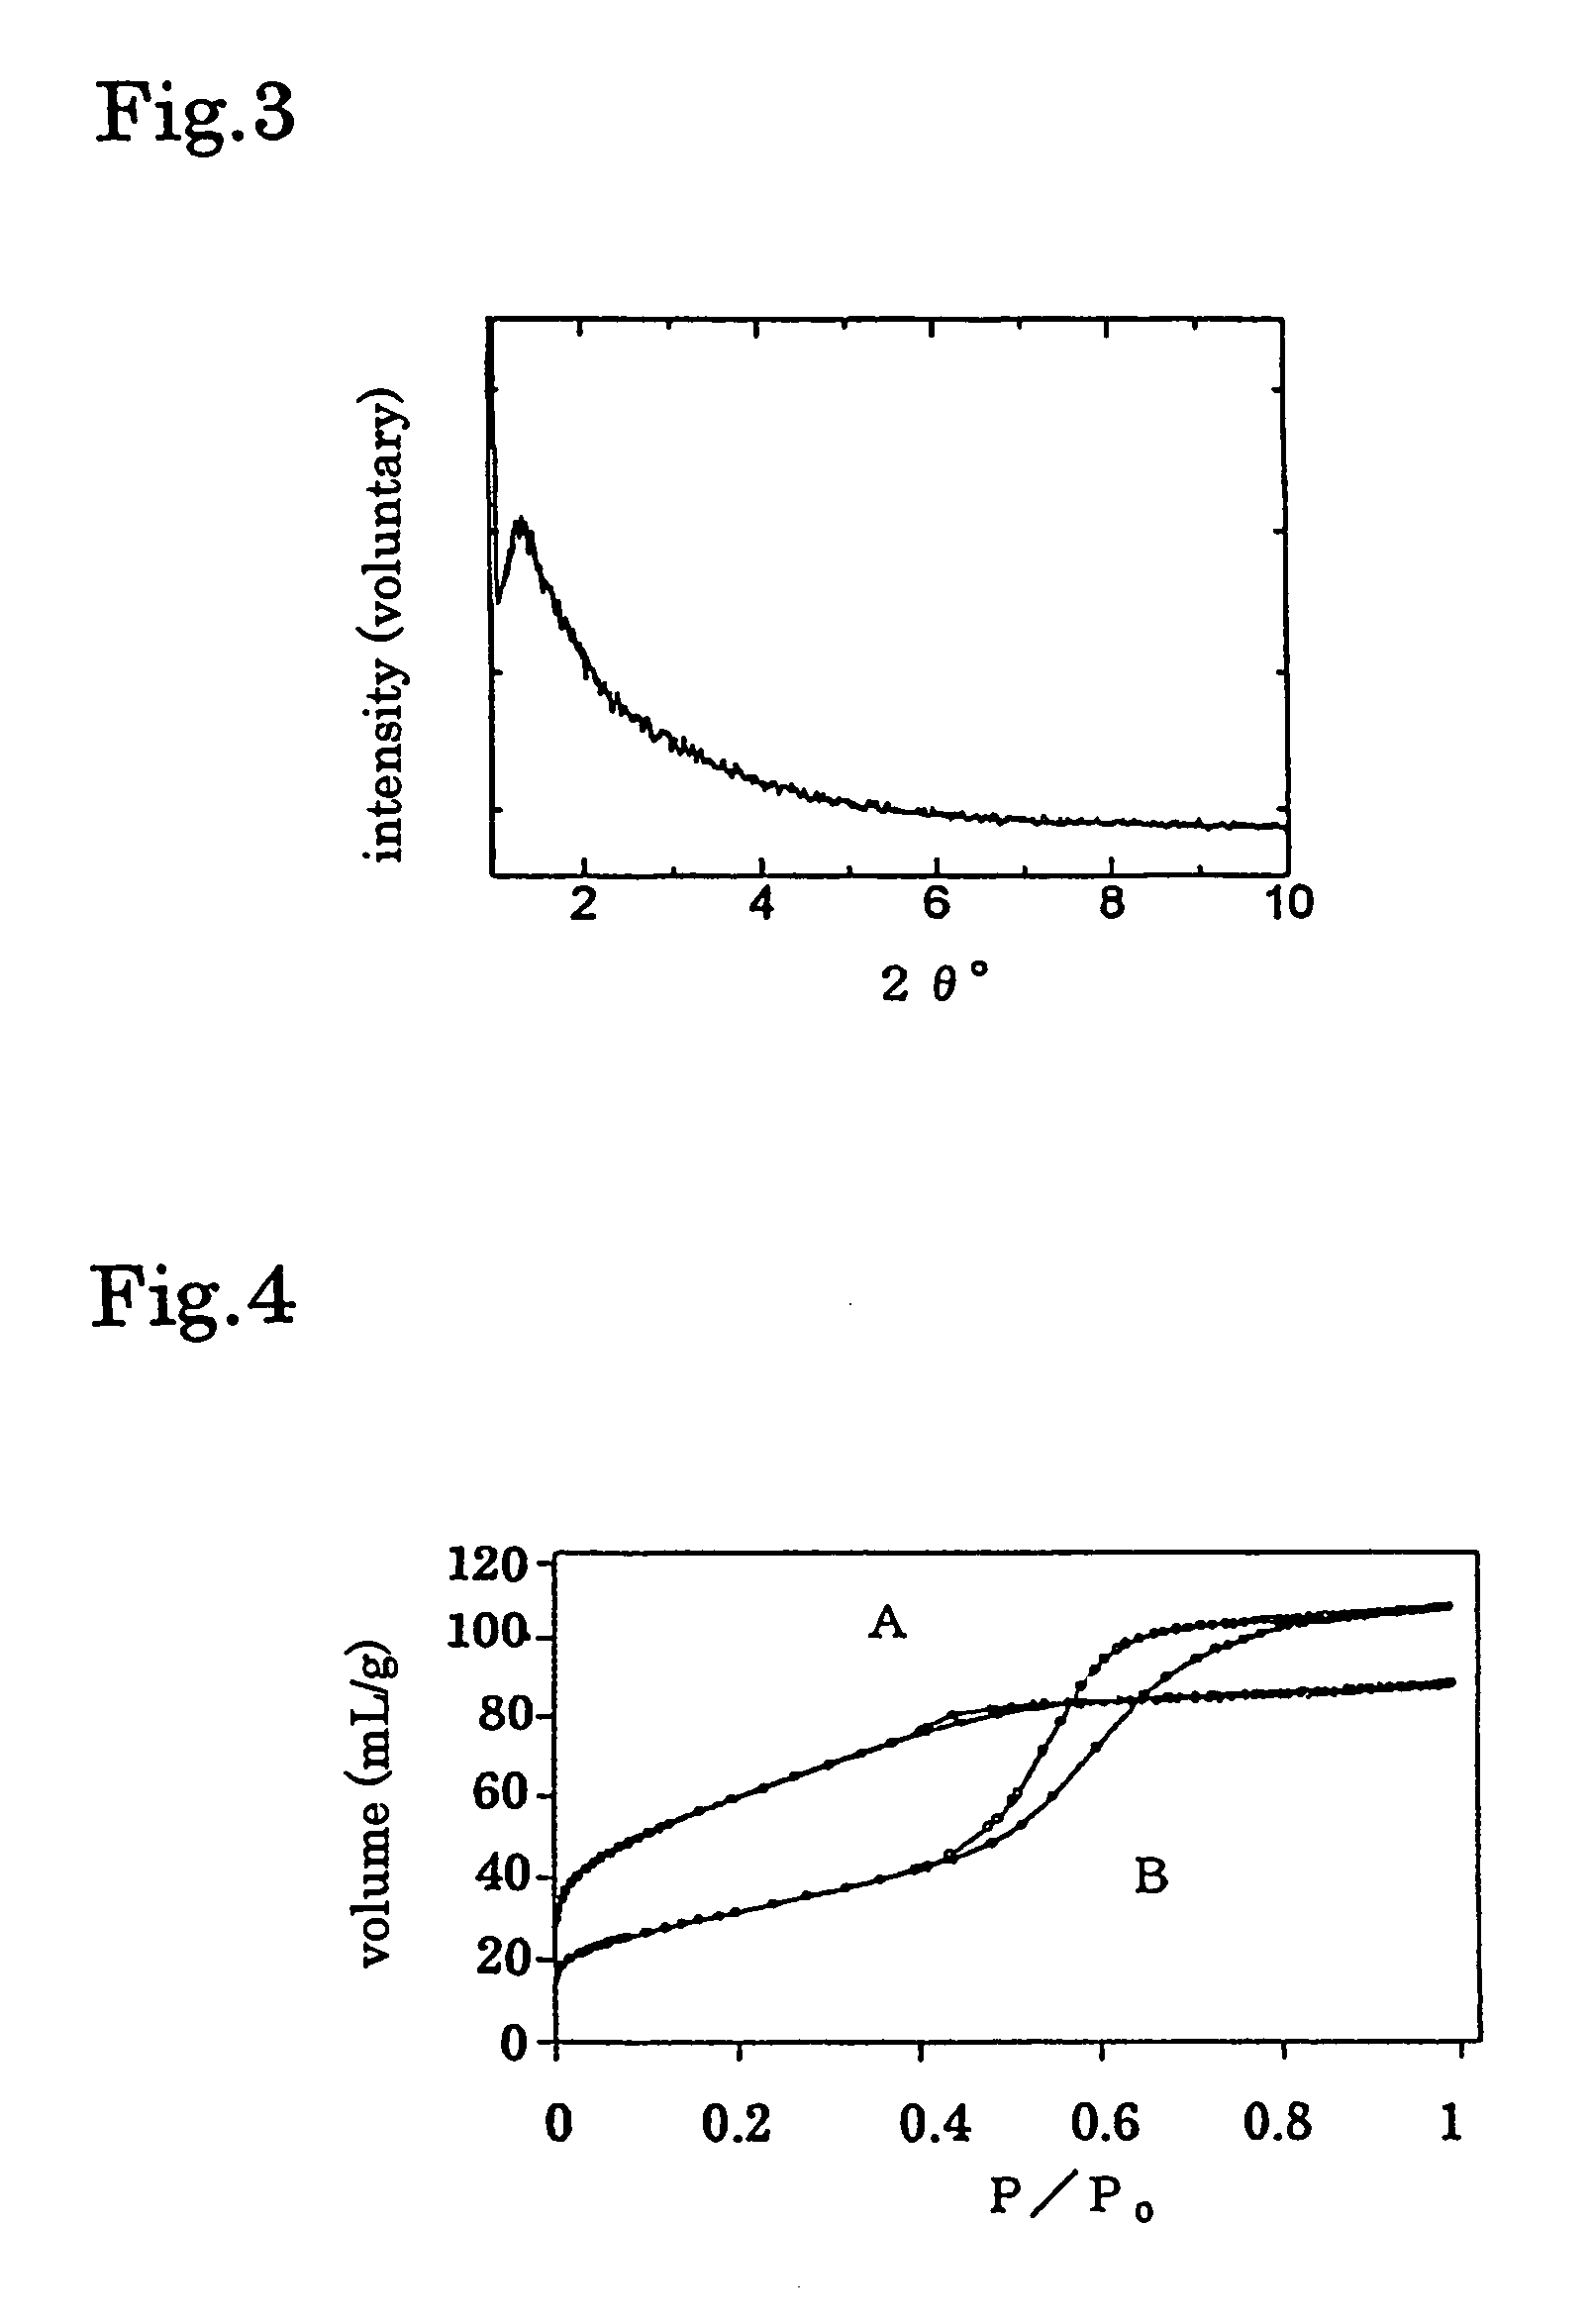 Process for producing micro-mesoporous metal oxide having regulated pores formed by novel template removal method